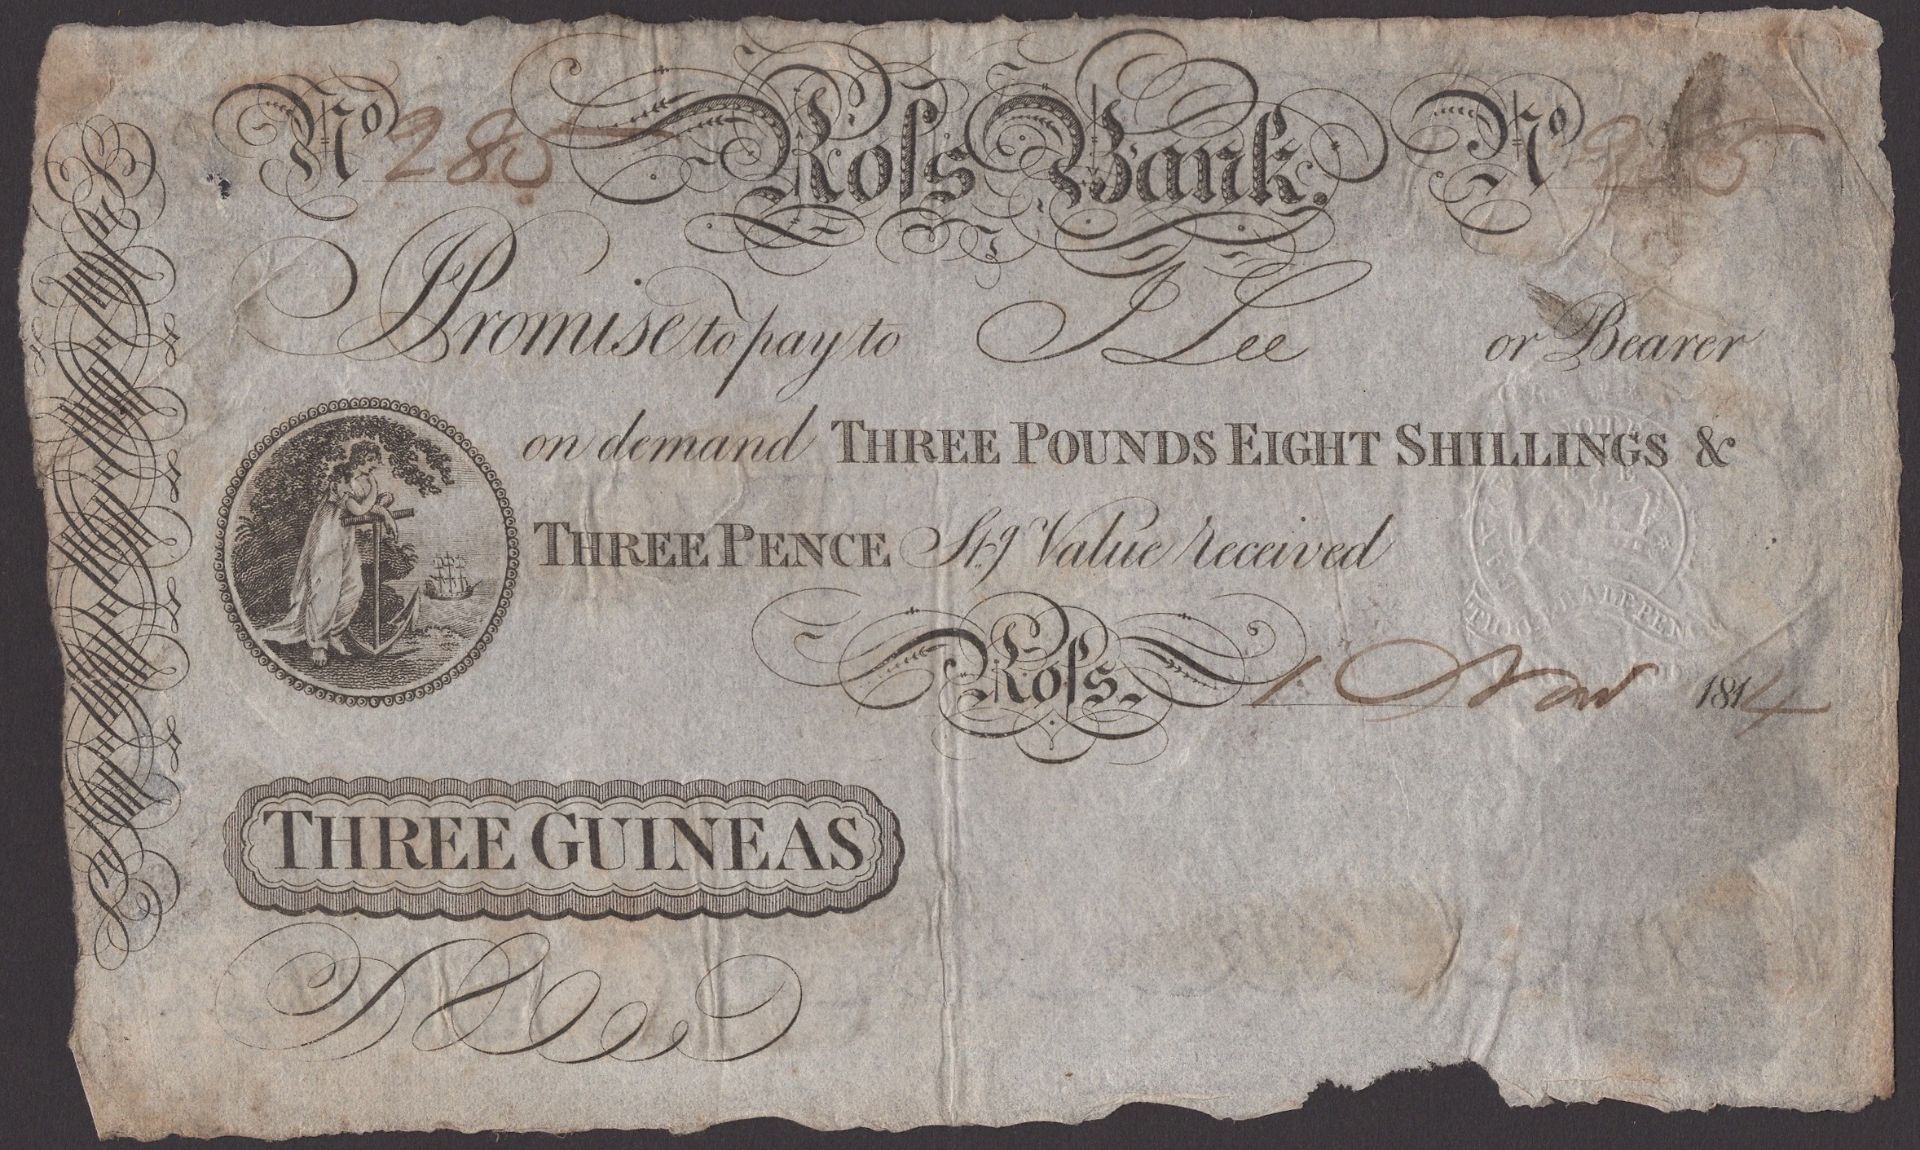 Ross Bank, 3 Guineas (3 Pounds, 8 Shillings and 3 Pence), 1 November 1814, serial number 285... - Bild 3 aus 4